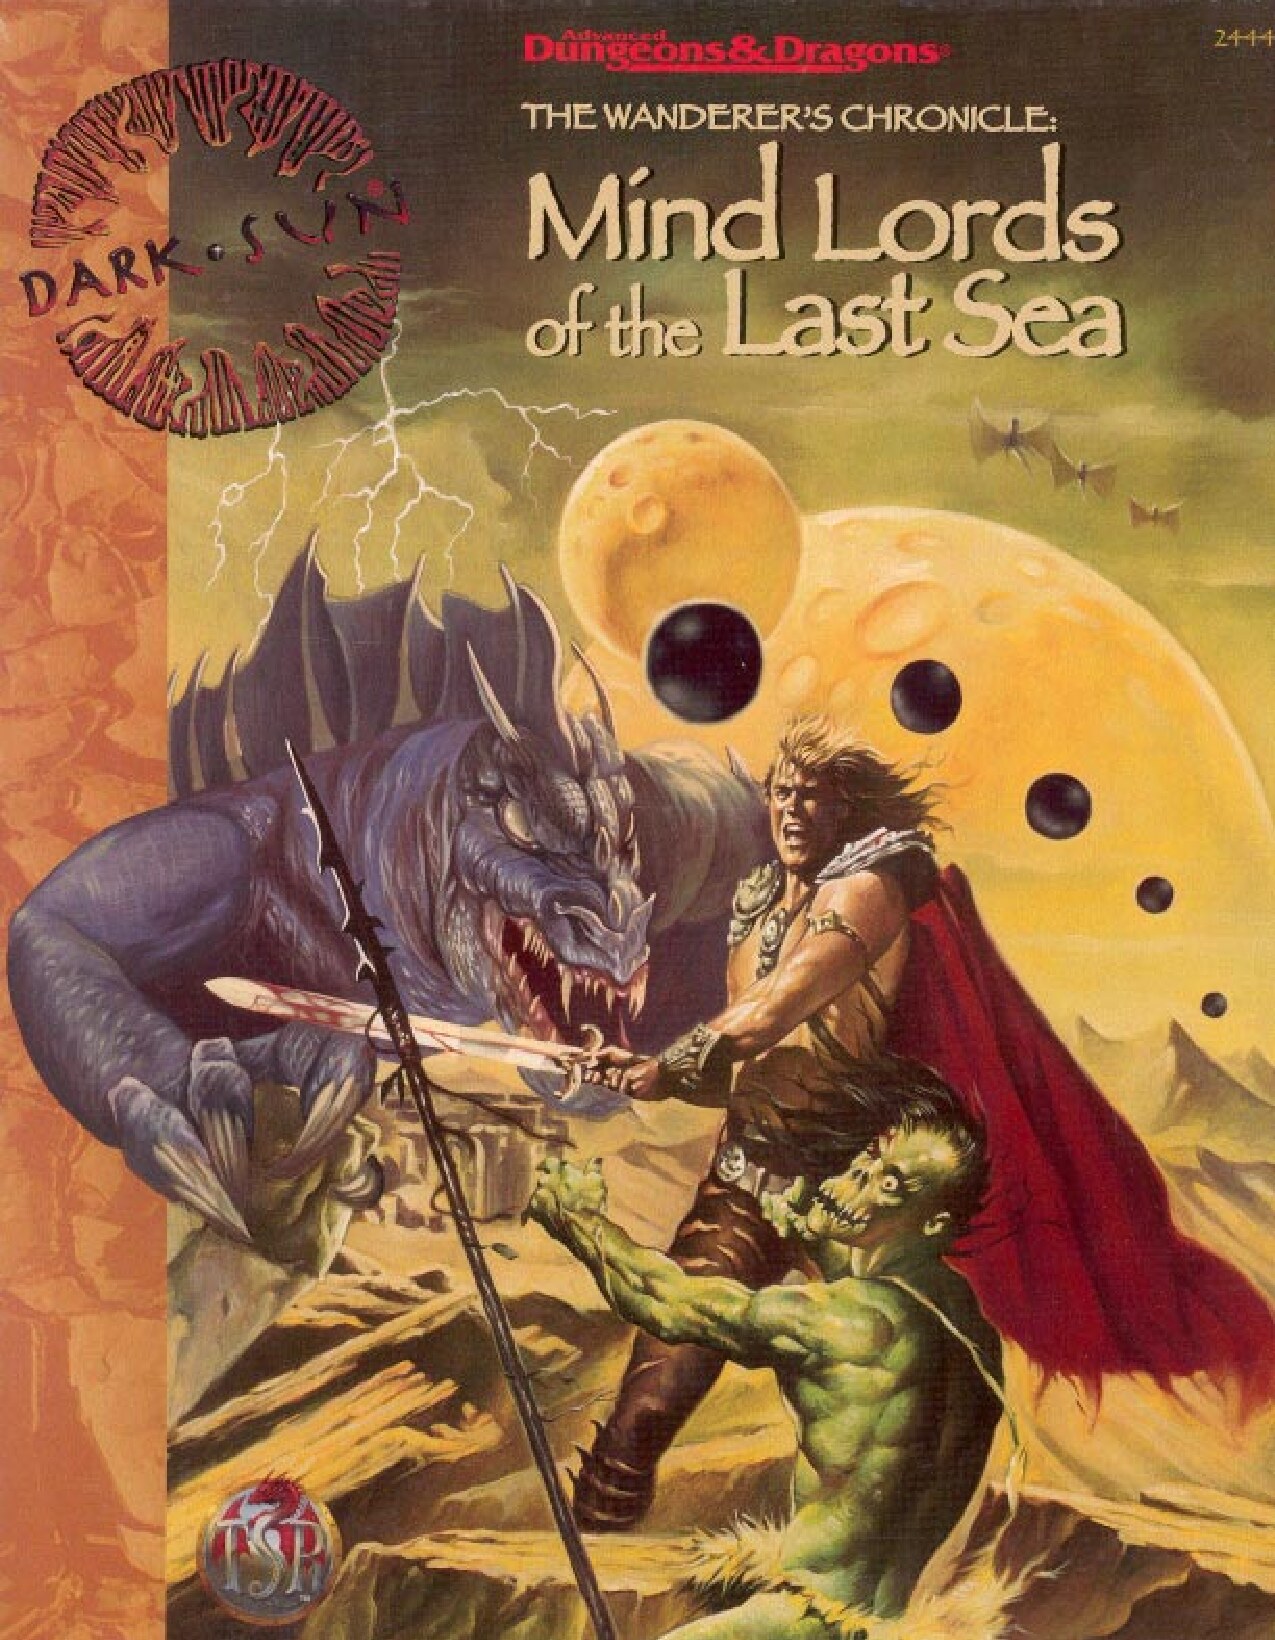 The Wanderer's Chronicle: Mind Lords of the Last Sea